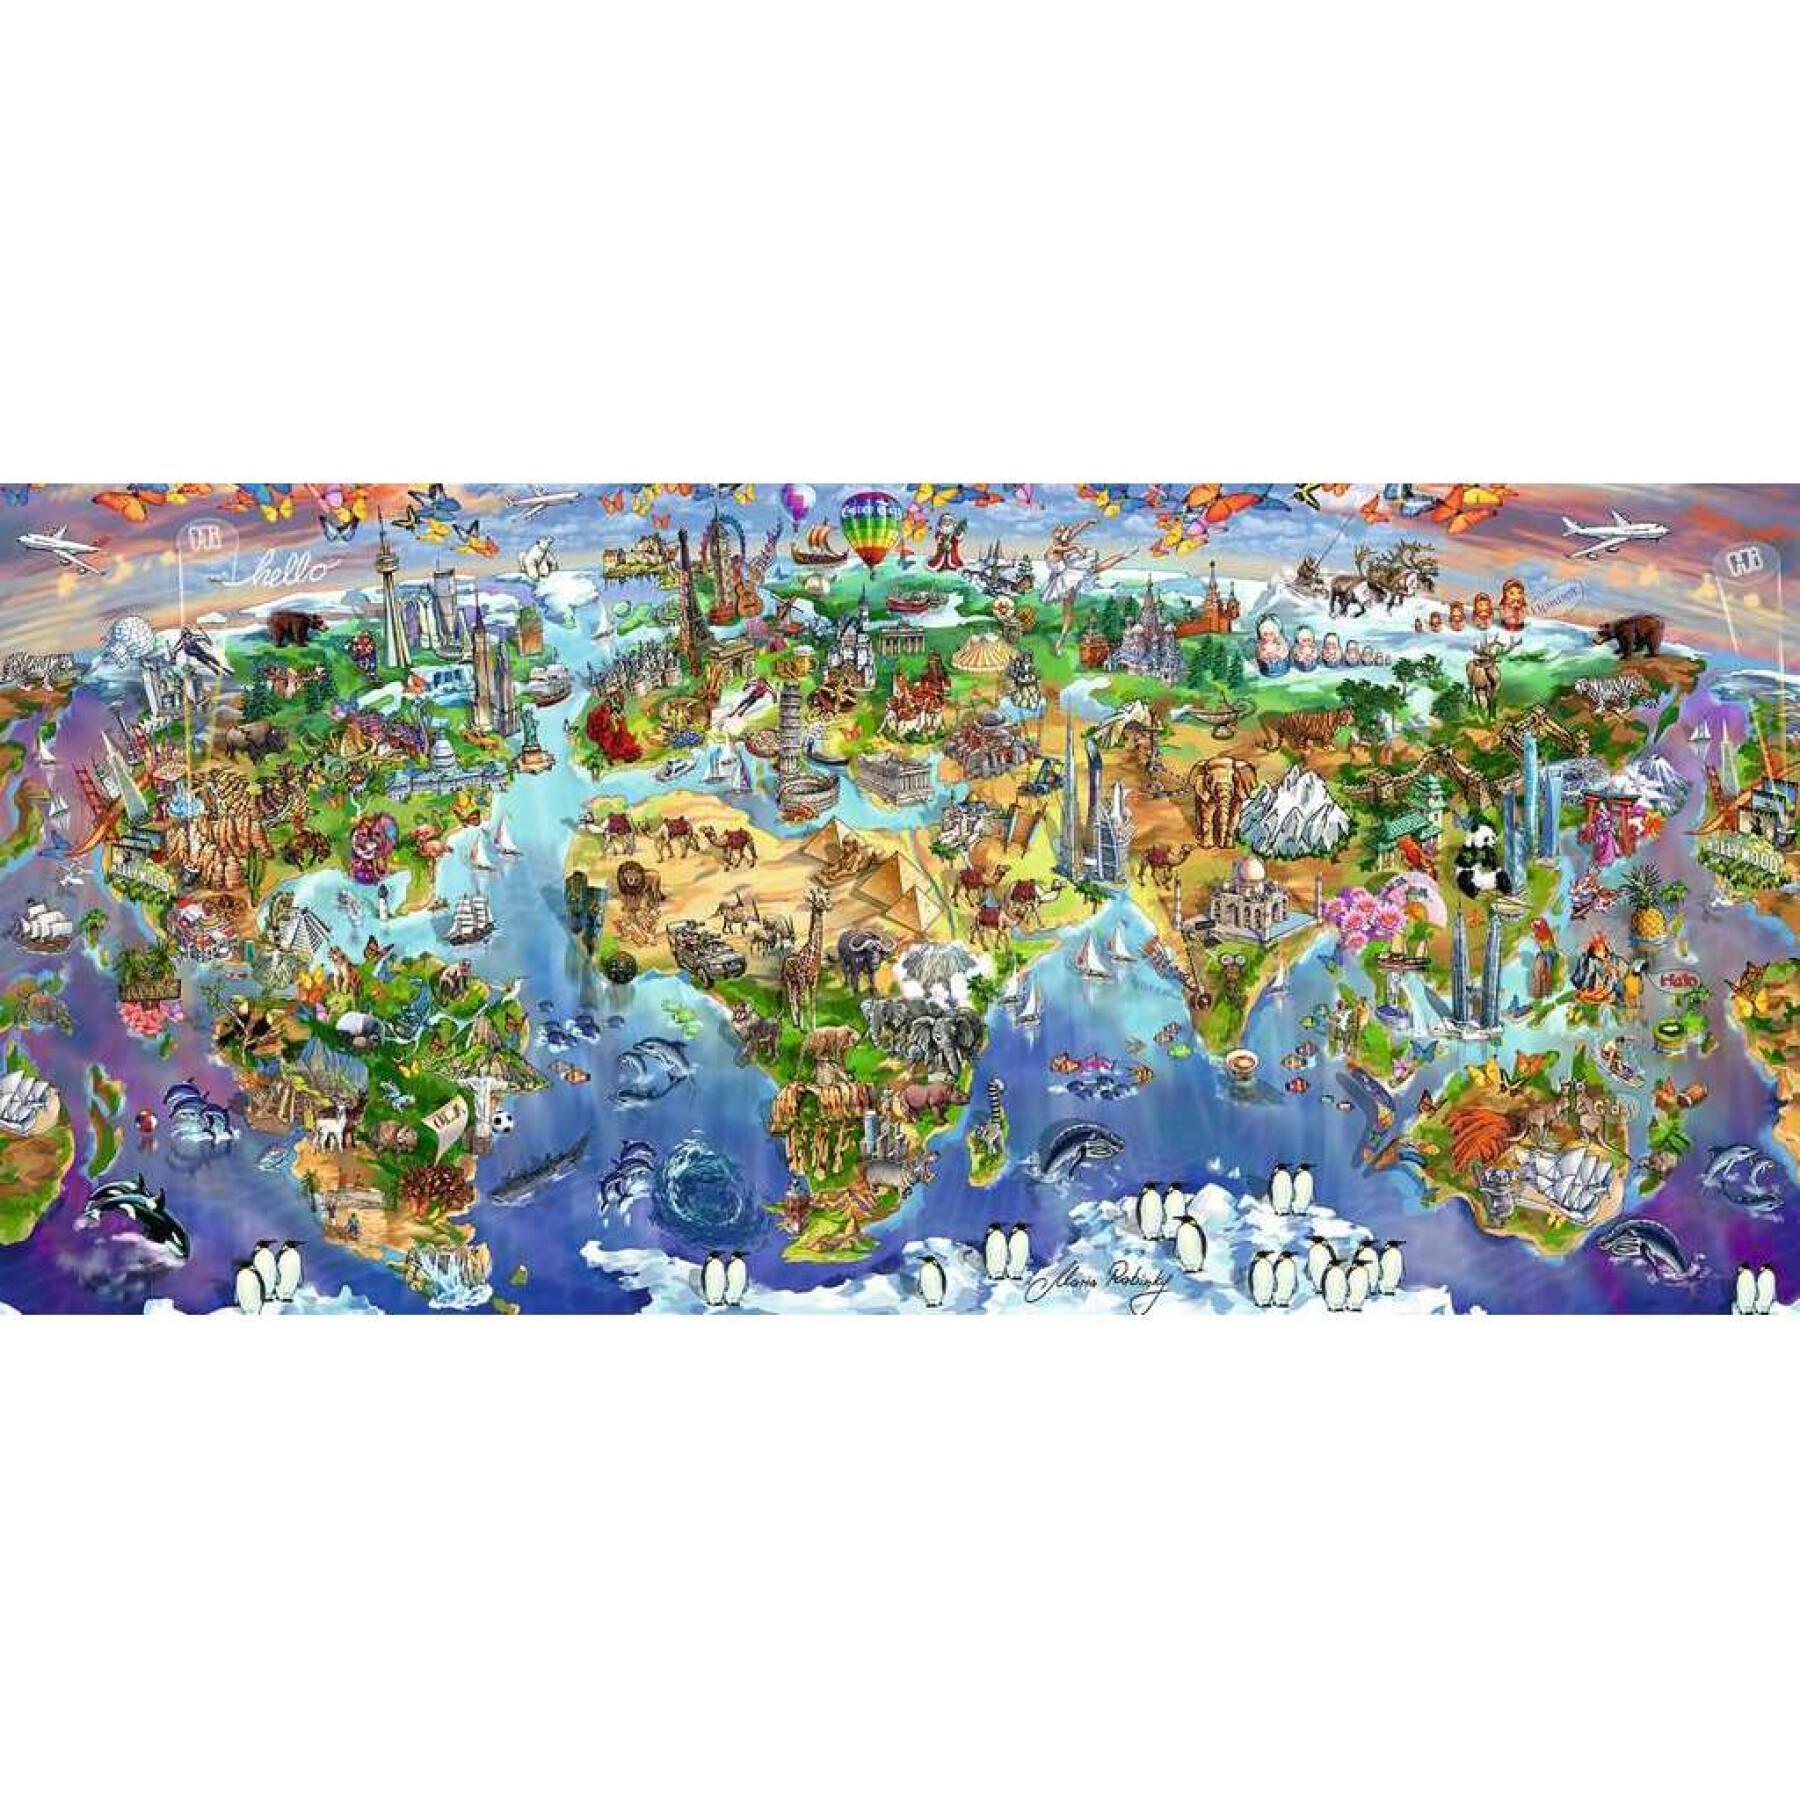 2000 pieces puzzle wonders of the world Ravensburger